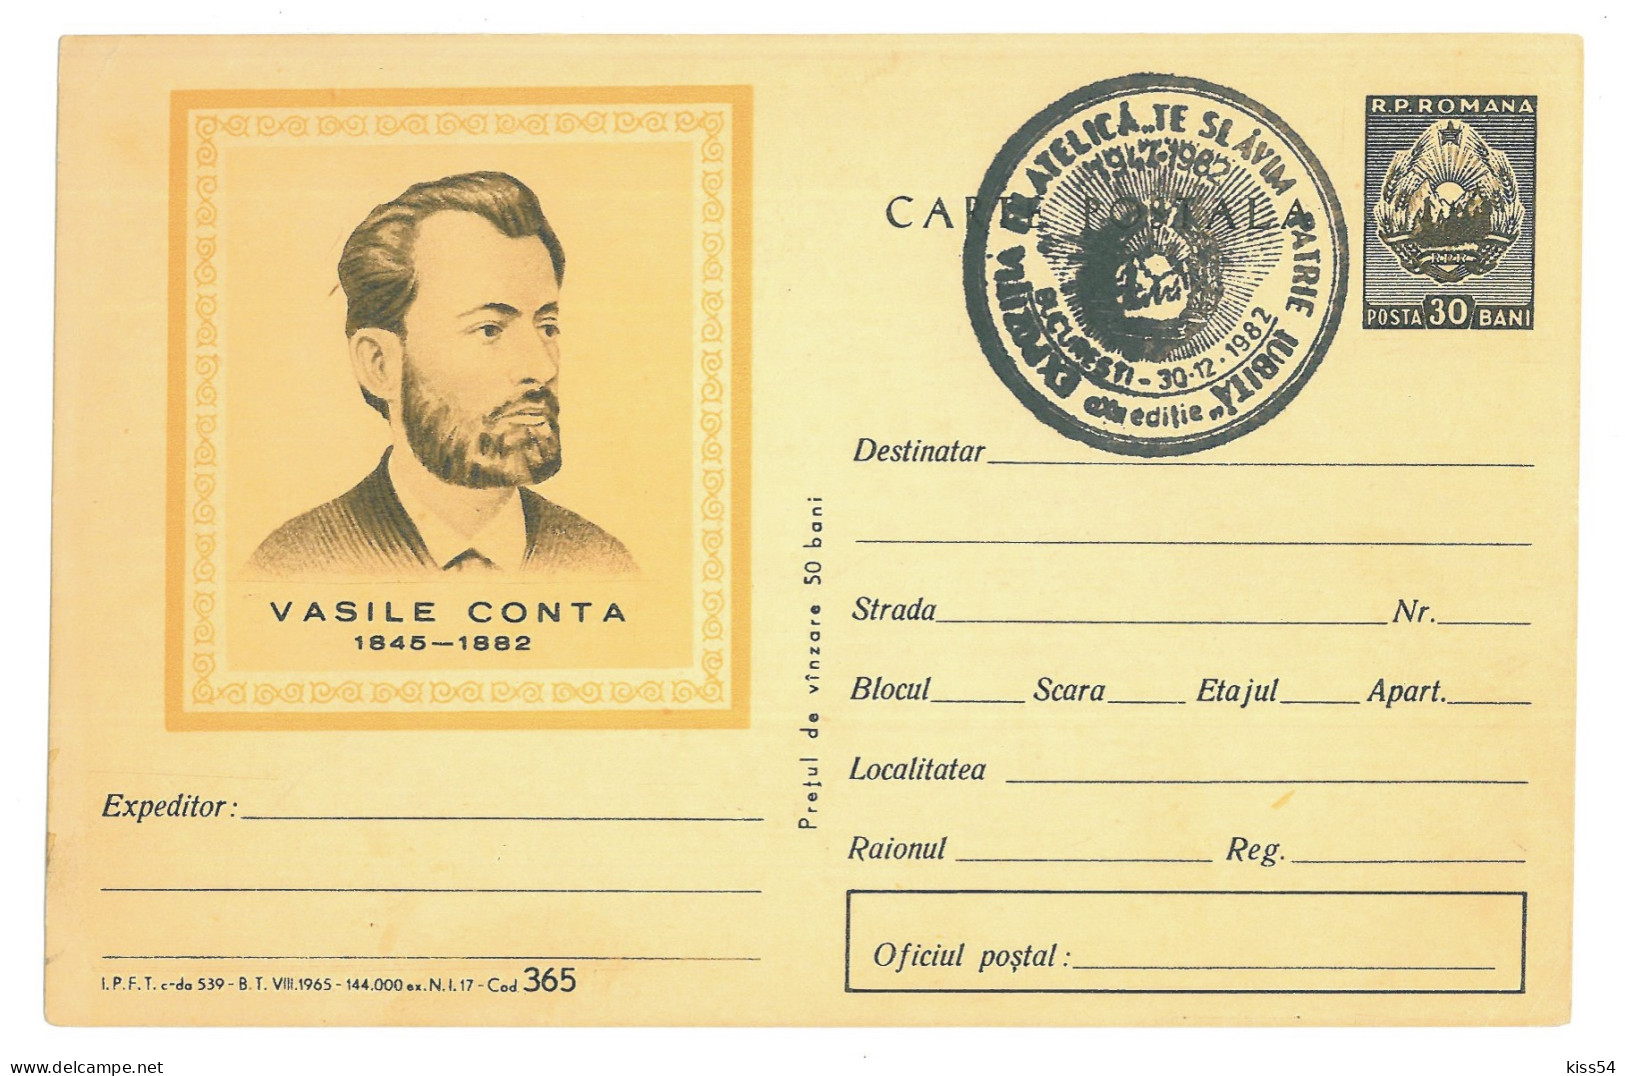 IP 65 A - 0365 VASILE CONTA, Iasi, Philosopher And Politician Romania - Stationery - Used - 1965 - Ganzsachen